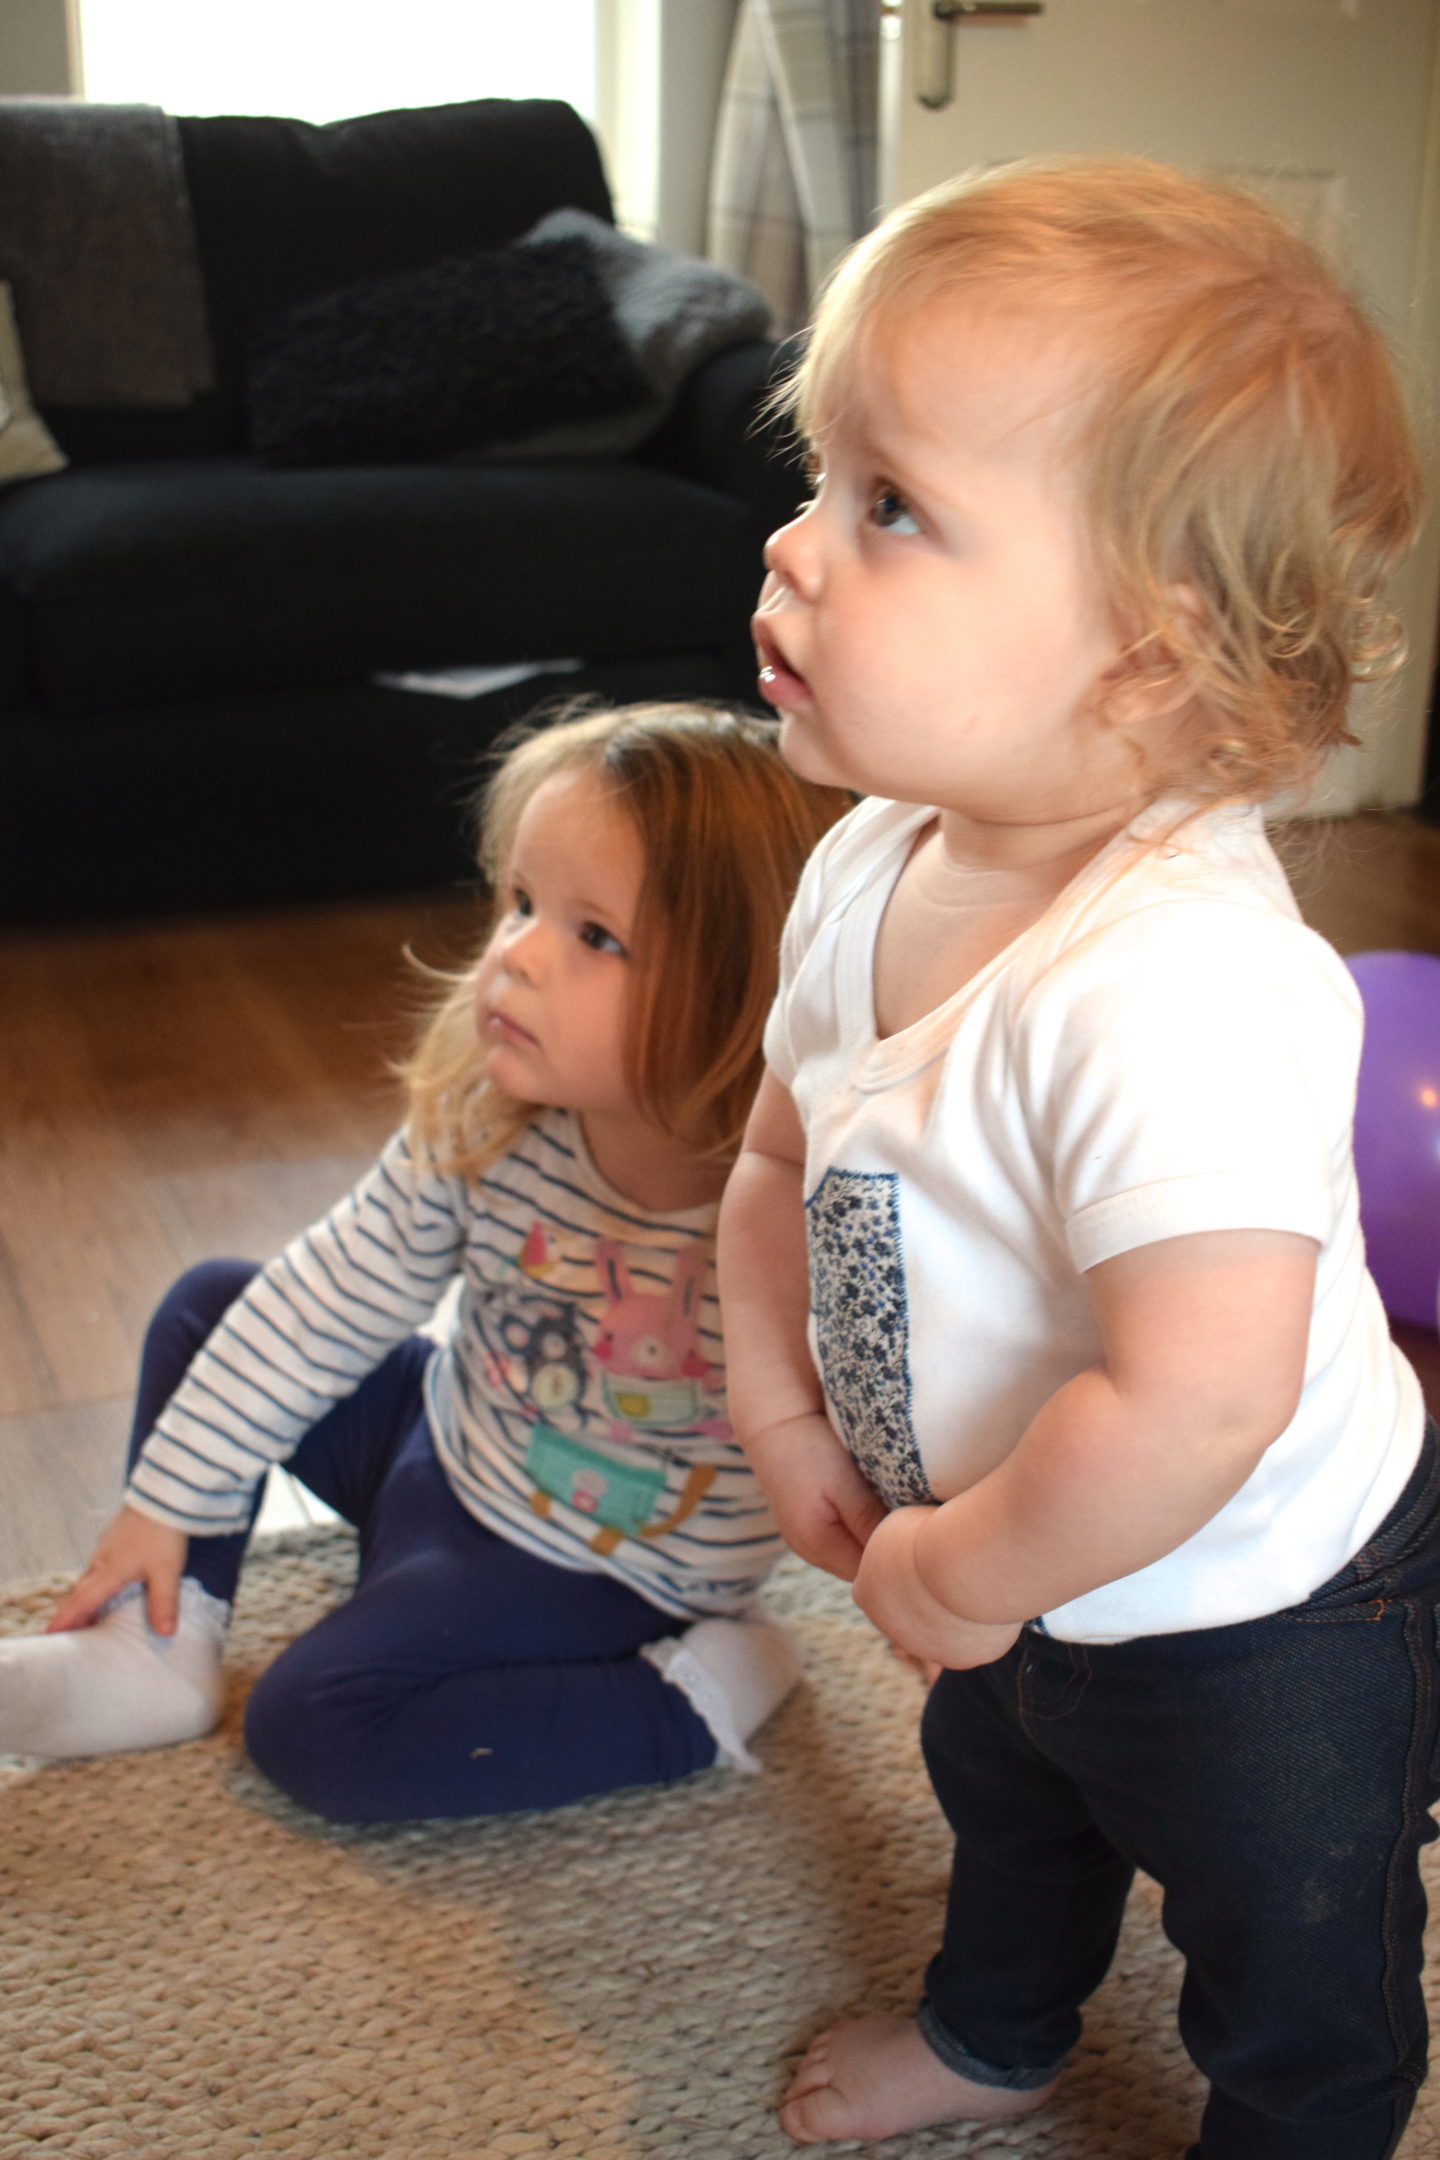 sisters, one standing, one sitting on the floor, watching TV